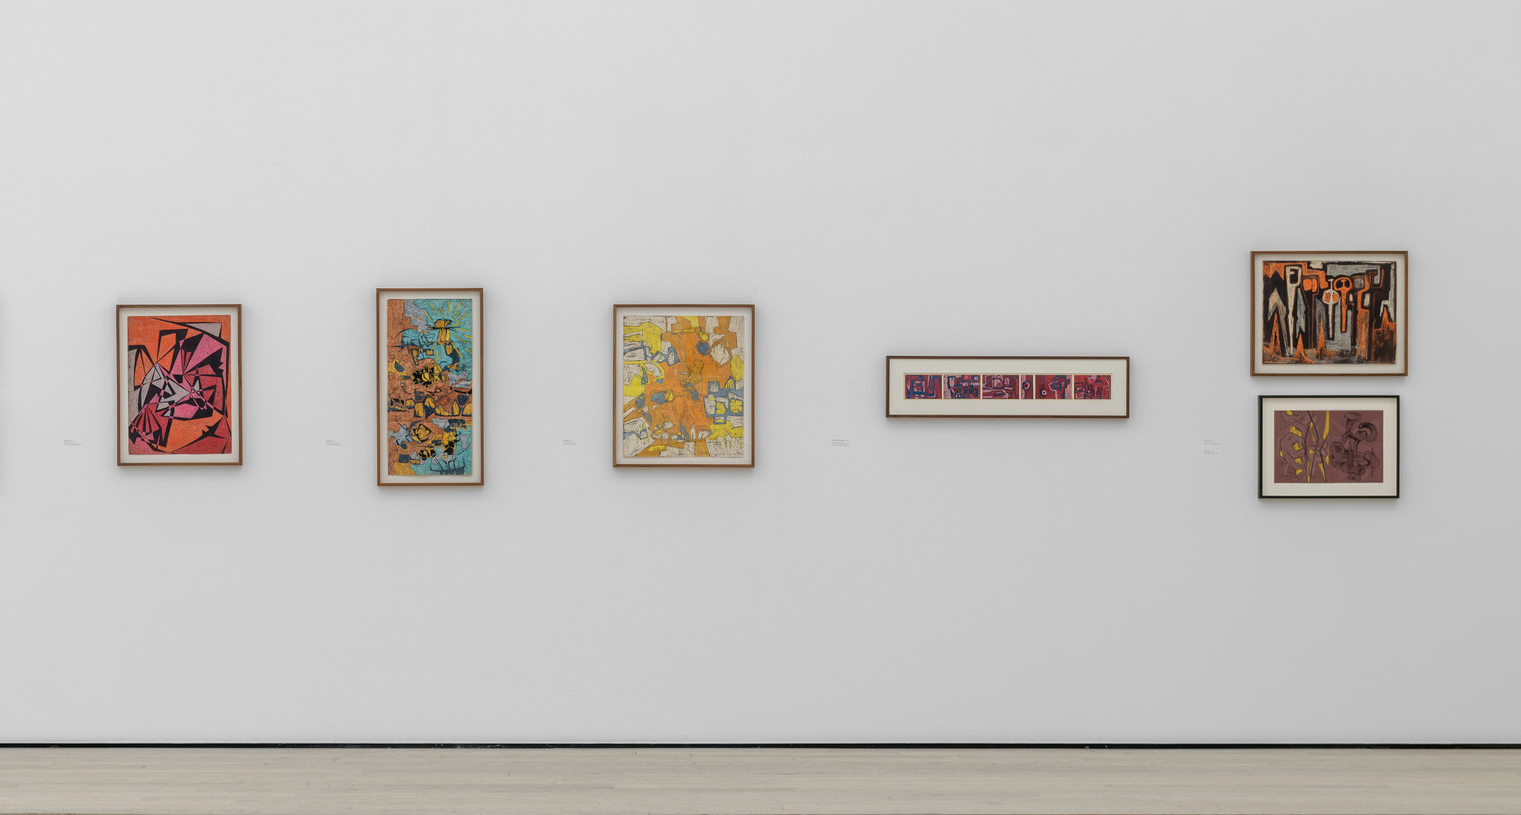 Installation view of Hurtado’s early abstract and biomorphic works in Luchita Hurtado: I Live I Die I Will Be Reborn, Los Angeles County Museum of Art, 2020, art © Luchita Hurtado, photo © Museum Associates/LACMA